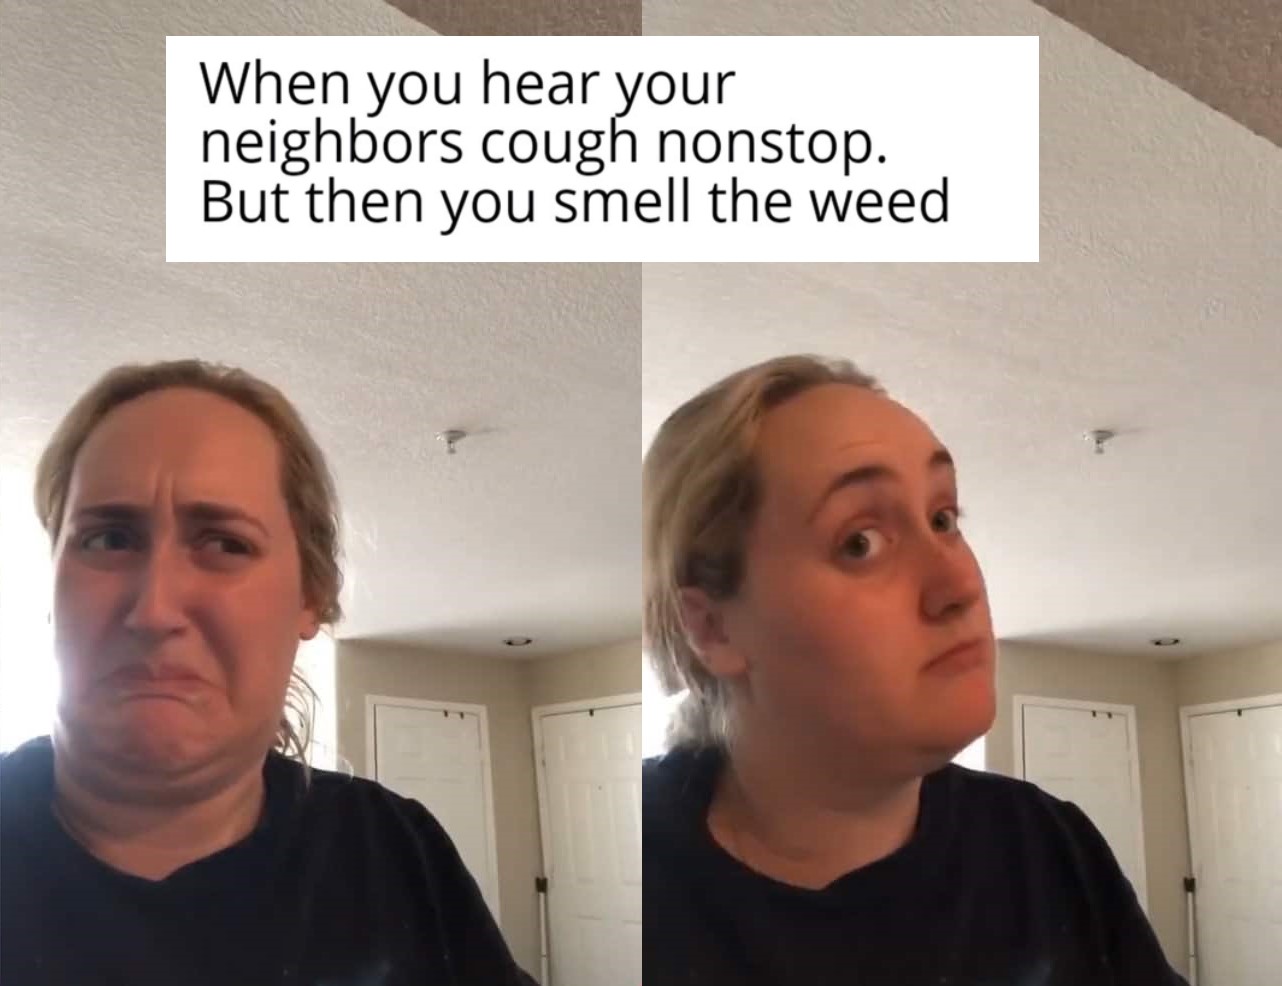 when you hear your neighbors coughing stoner meme, when you hear your neighbors weed meme, when you hear your neighbors coughing but then smell weed stoner meme, stoner meme, stoner memes, funny stoner meme, funny stoner memes, meme stoner, memes stoner, memes about stoners, meme about stoners, memes about being a stoner, hilarious stoner meme, hilarious stoner memes, meme about being a stoner, smoking weed meme, smoking weed memes, weed smoking meme, weed smoking memes, weed meme, weed memes, funny weed meme, funny weed memes, meme weed, memes weed, meme weed funny, memes weed funny, cannabis meme, cannabis memes, funny cannabis meme, funny cannabis memes